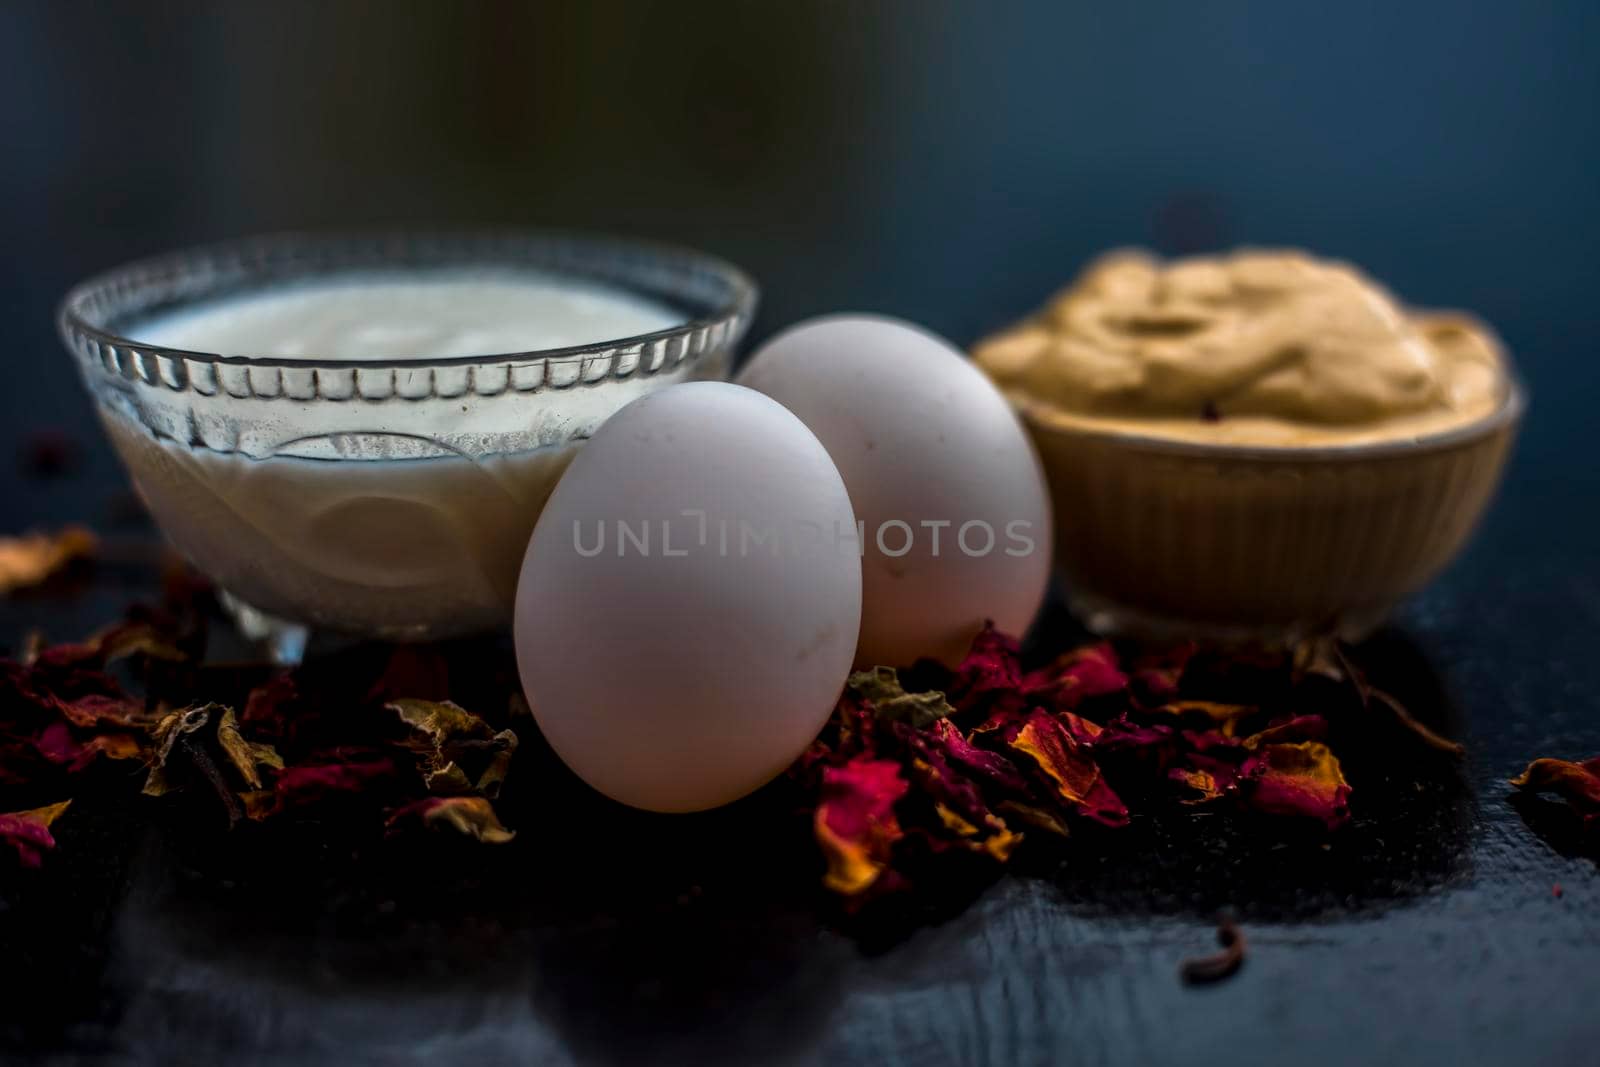 Best DIY face mask of multani mitti or mulpani mitti along with egg white and some yogurt well mixed in a glass bowl on the black wooden surface for the remedy of even skin. by mirzamlk